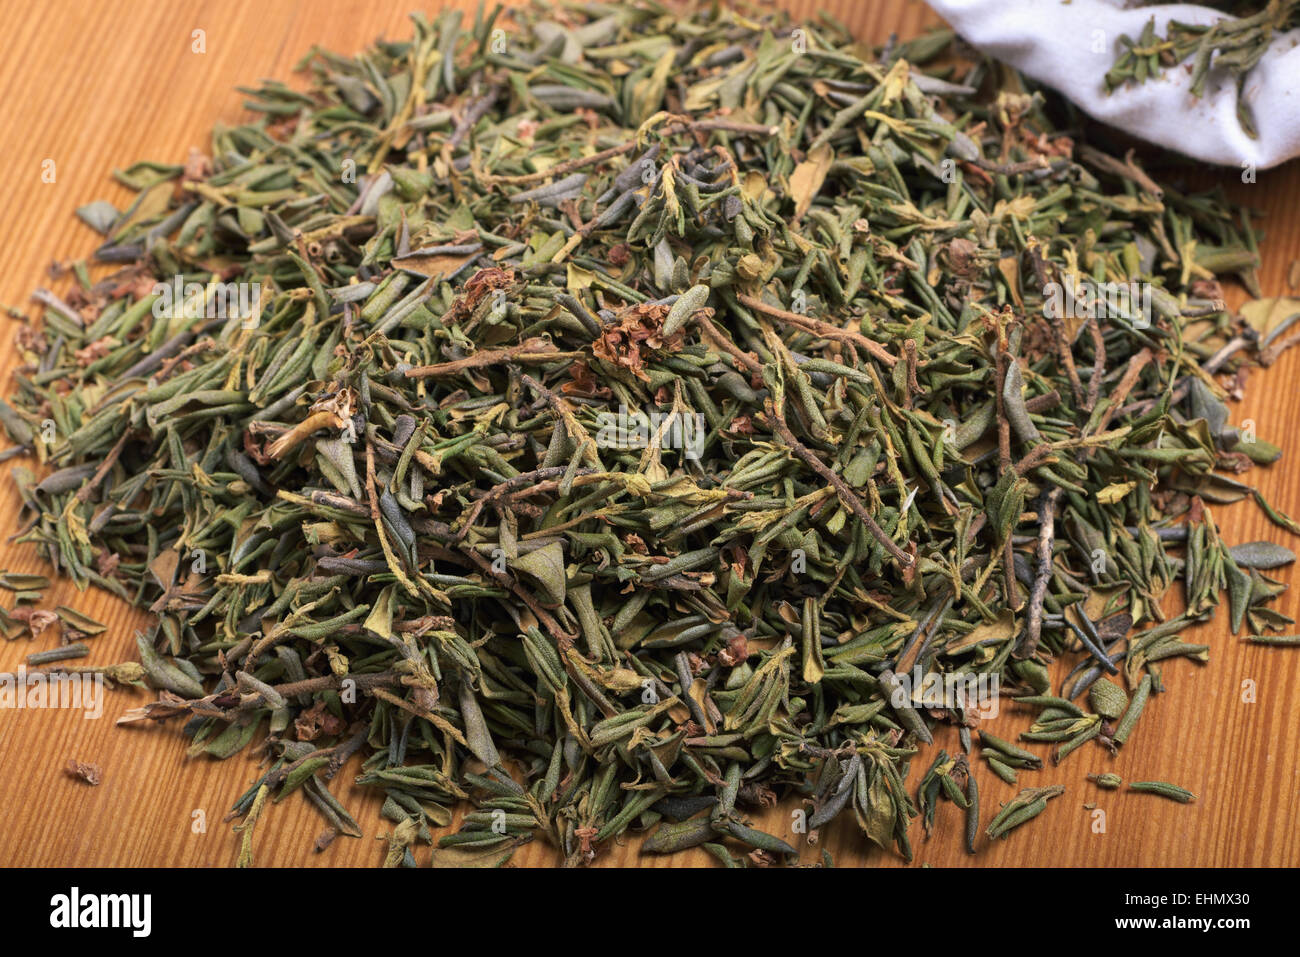 Rhododendron adamsii - dried leaves for the preparation of healing tea beverage Stock Photo